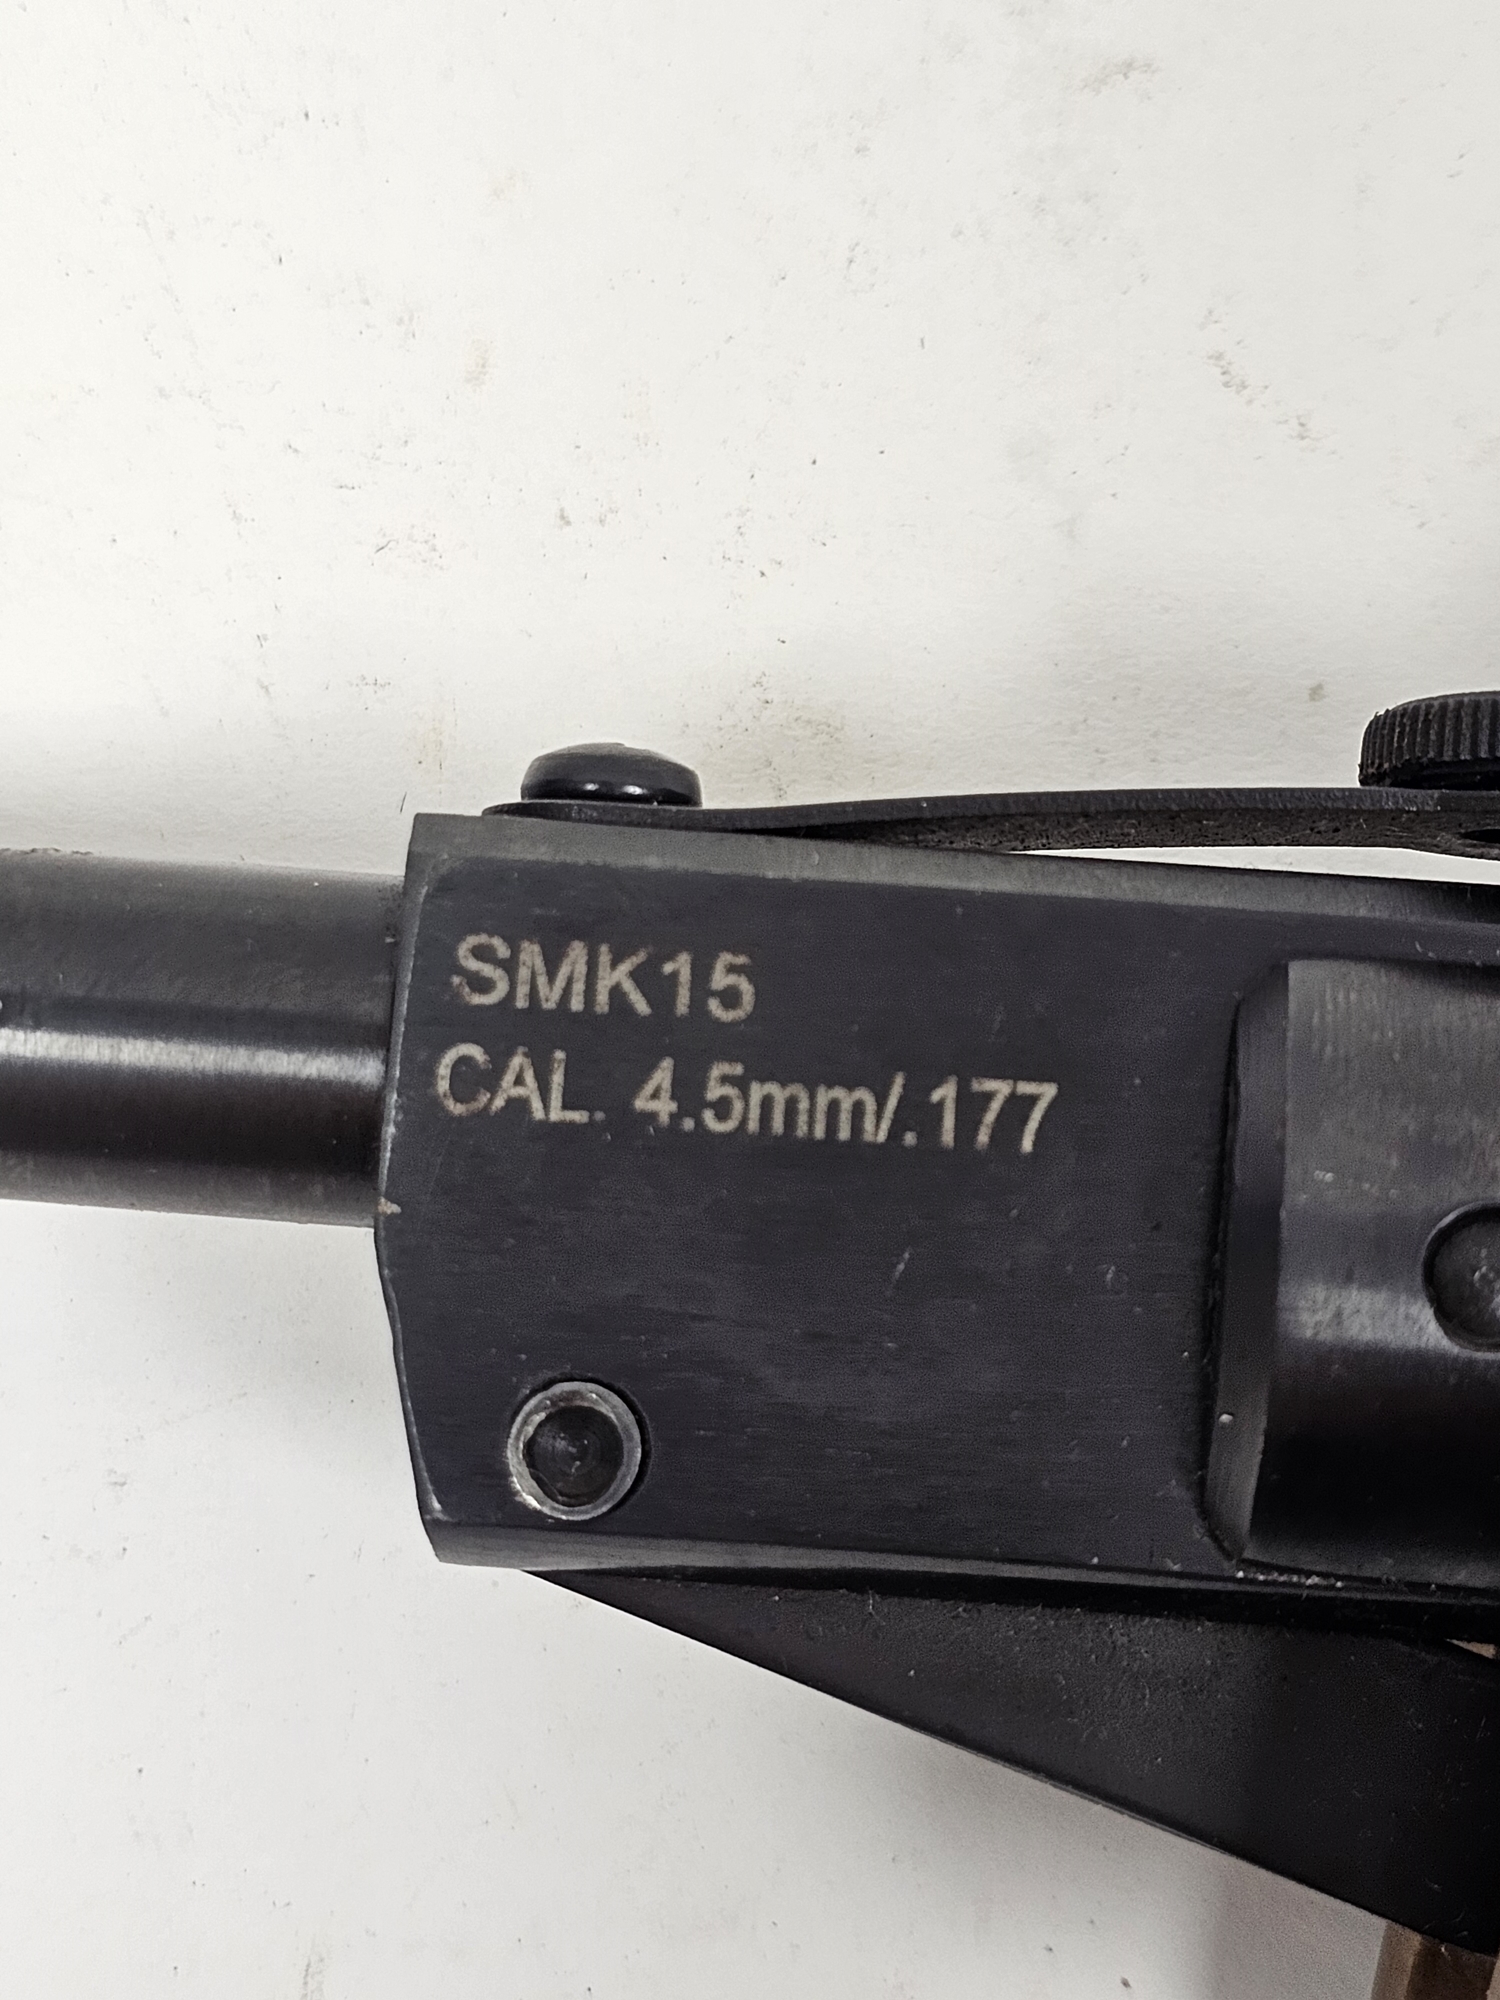 SMK 15 .177 cal air rifle, measures approximately 92cm long Auctioneers firearms permit number 53/ - Image 2 of 3